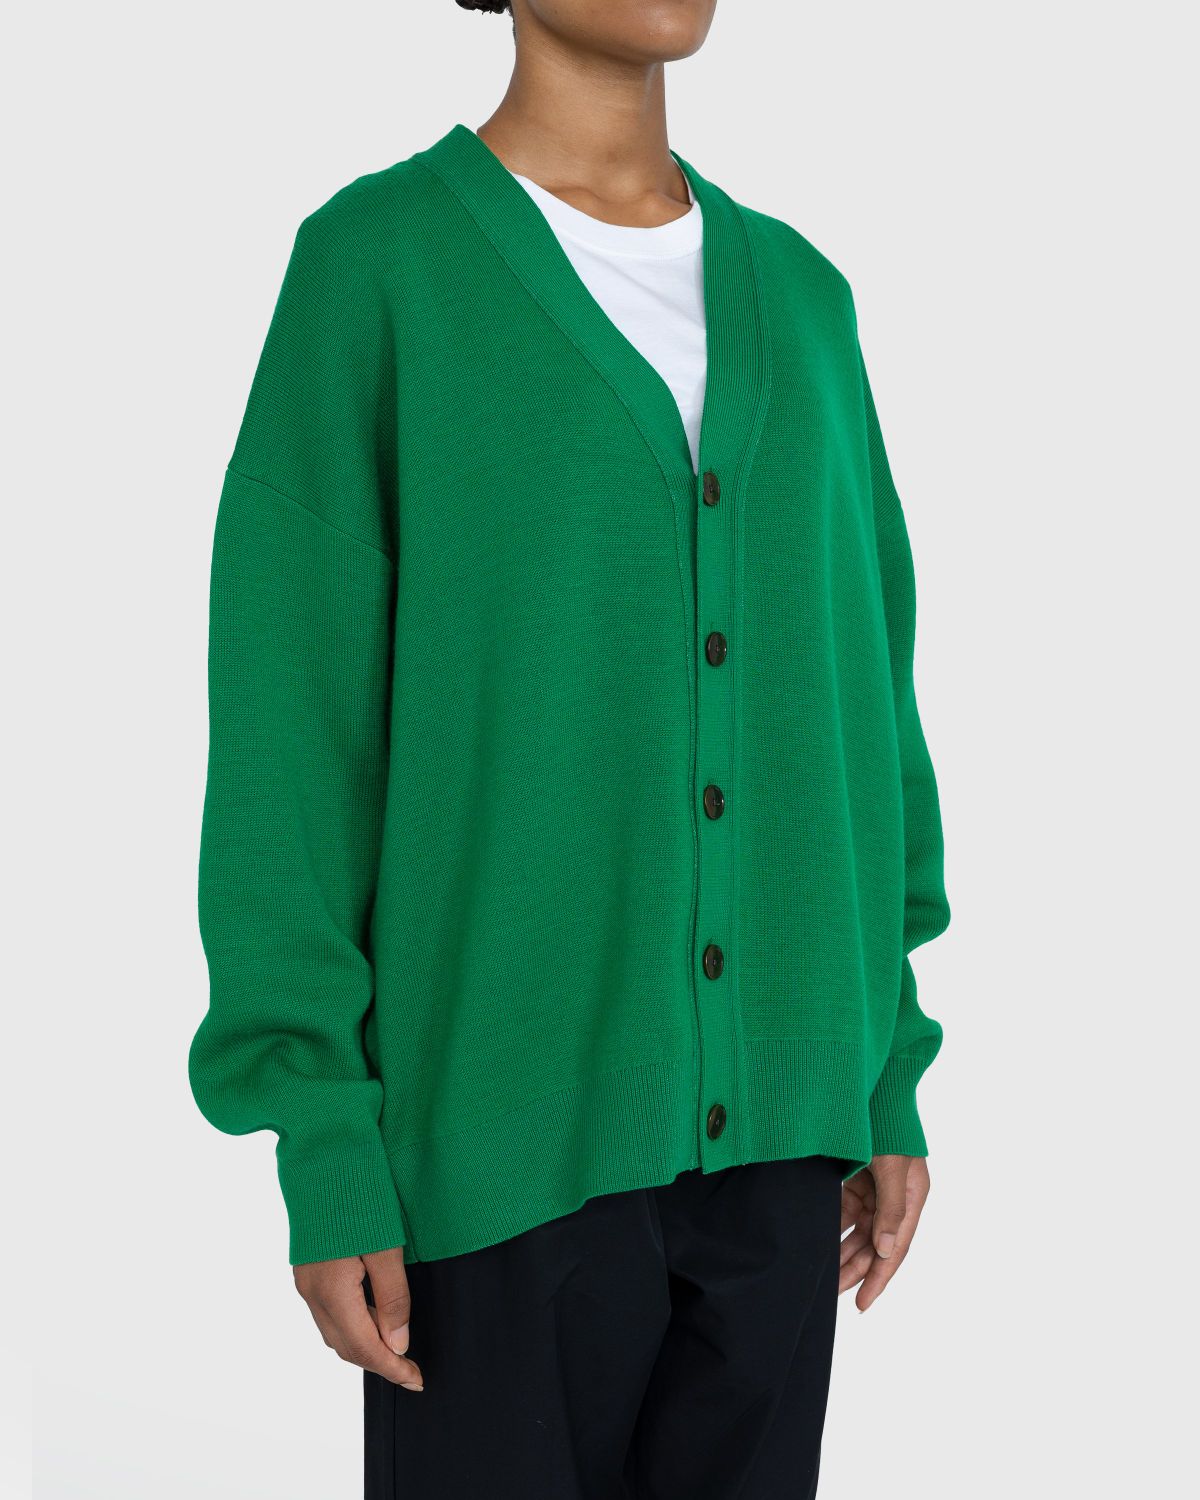 Acne Studios – Wool Blend V-Neck Cardigan Sweater Electric Green - Cardigans - Green - Image 3